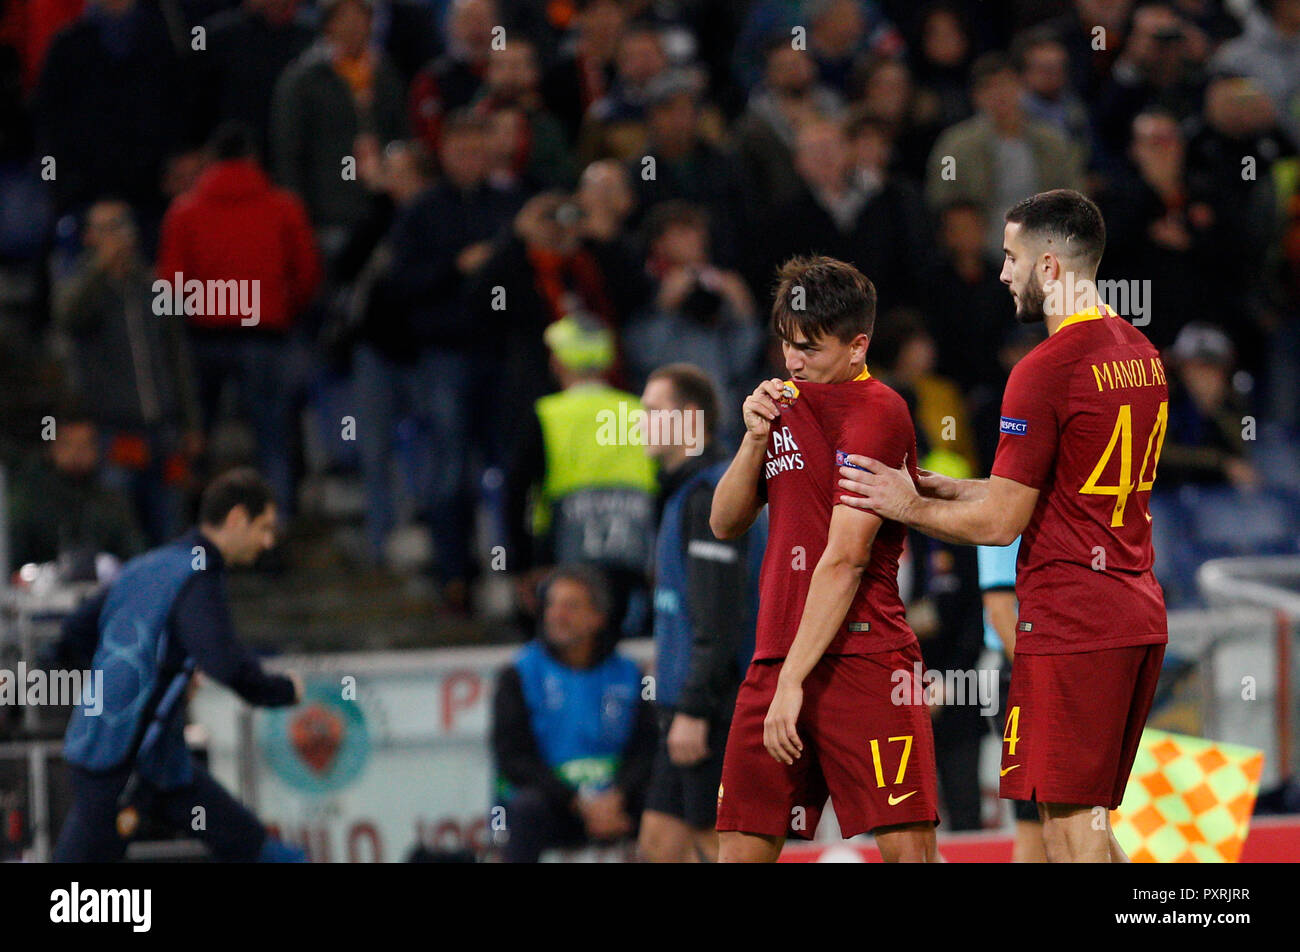 Rome, Italy, 23rd October, 2018. Roma's Cengiz Under, left, celebrates with his teammate Kostas Manolas after scoring during the Champions League Group G soccer match between Roma and CSKA Moscow at the Olympic Stadium. Roma won 3-0. © Riccardo De Luca UPDATE IMAGES/ Alamy Live News Stock Photo